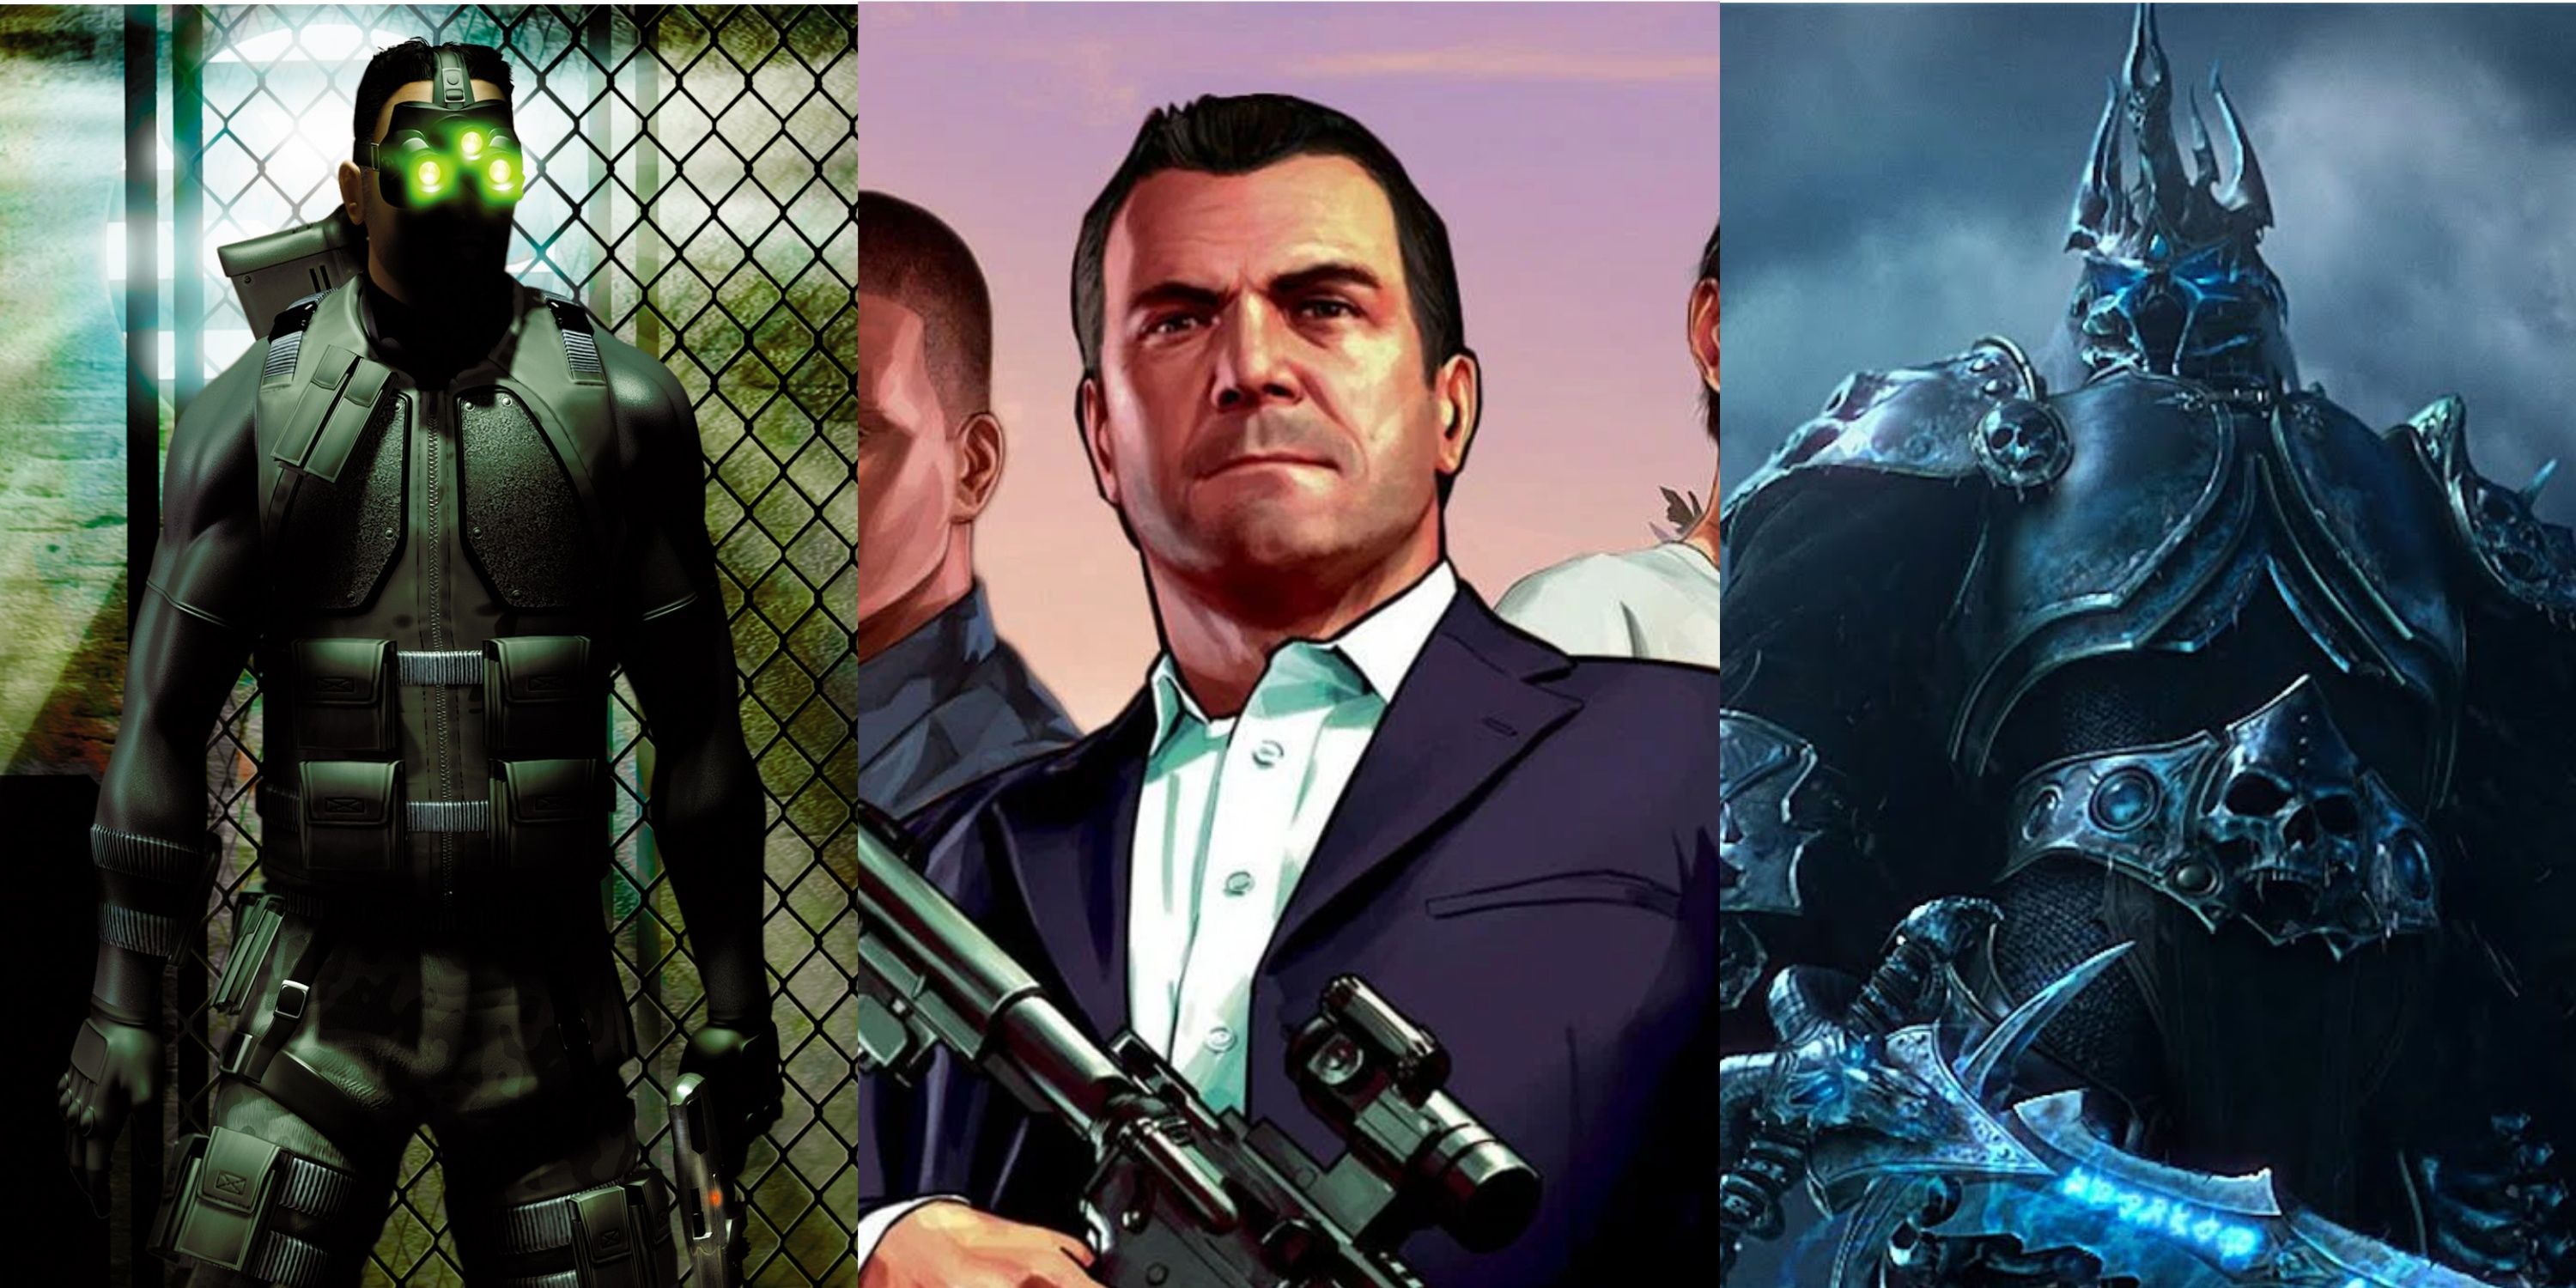 Image of Splinter Cell, GTA and WoW